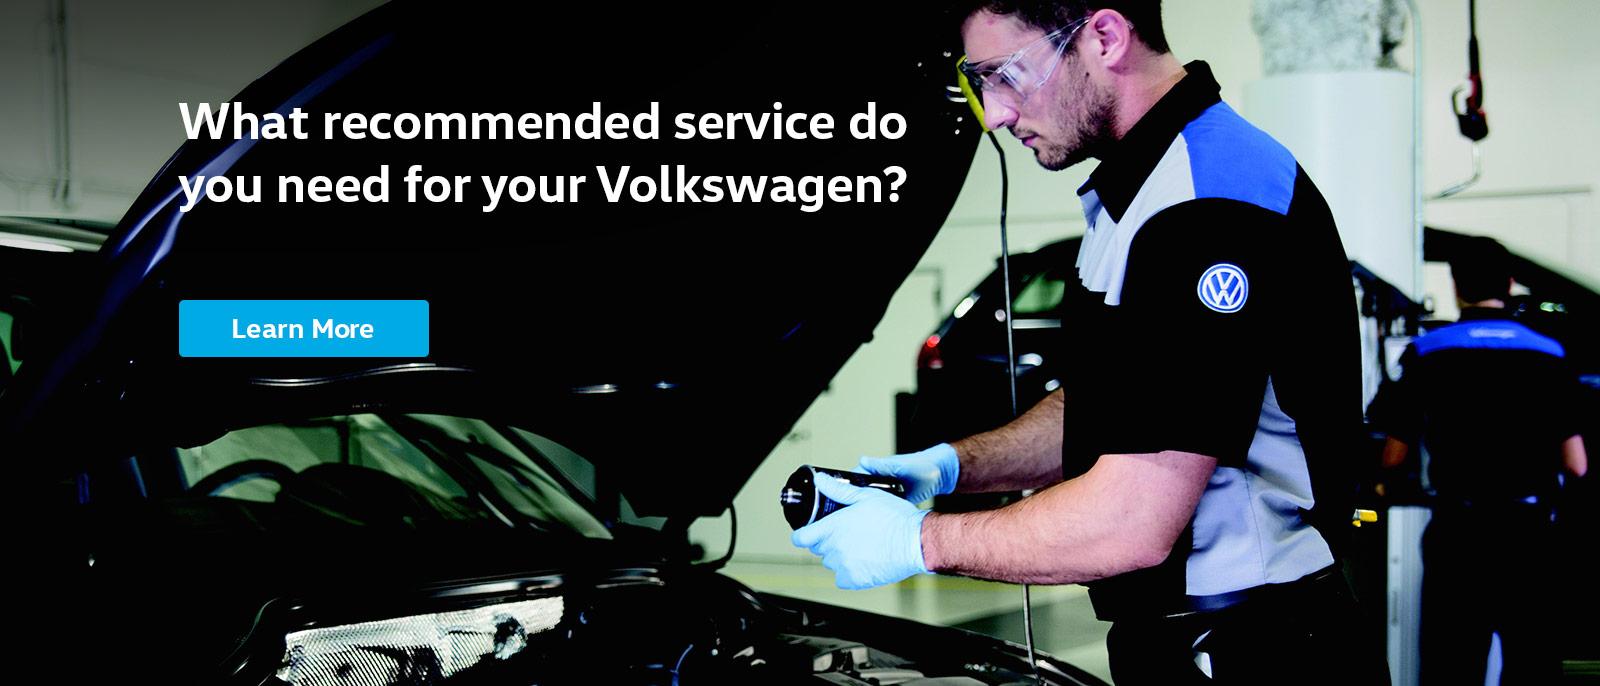 What recommended service do you need for your Volkswagen? - Learn More